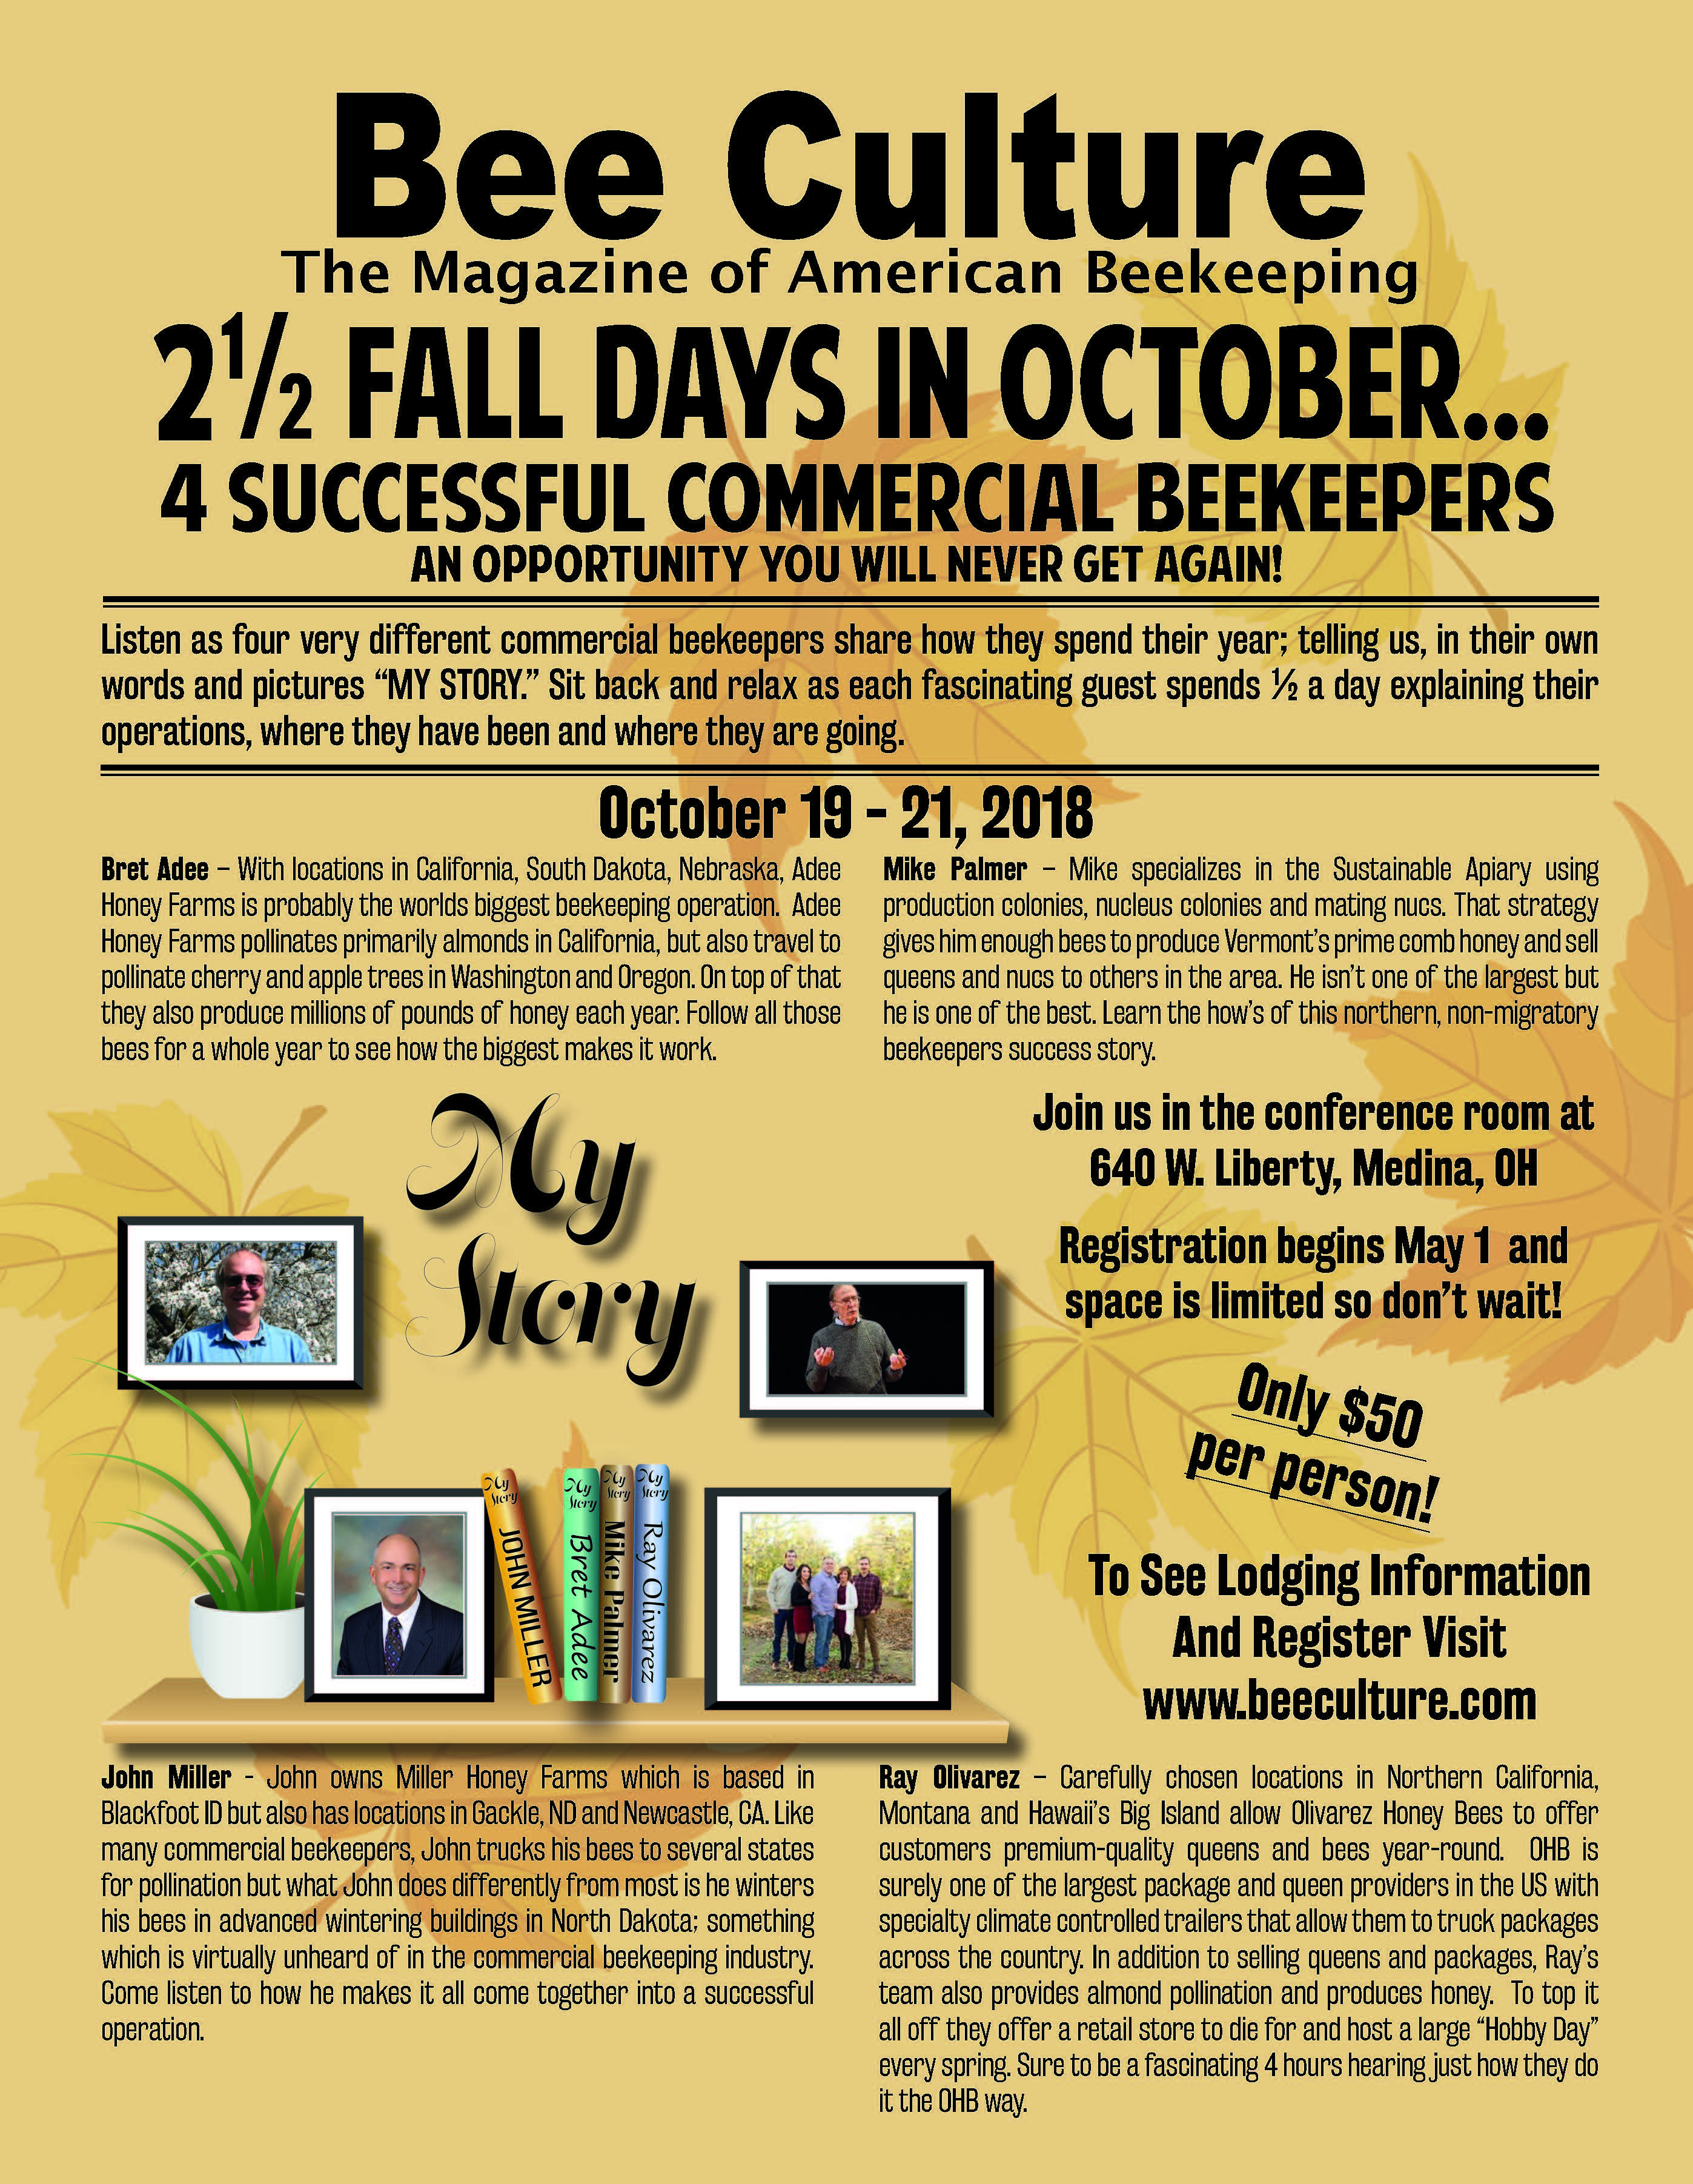 Bee Culture’s Fall Event – “My Story”